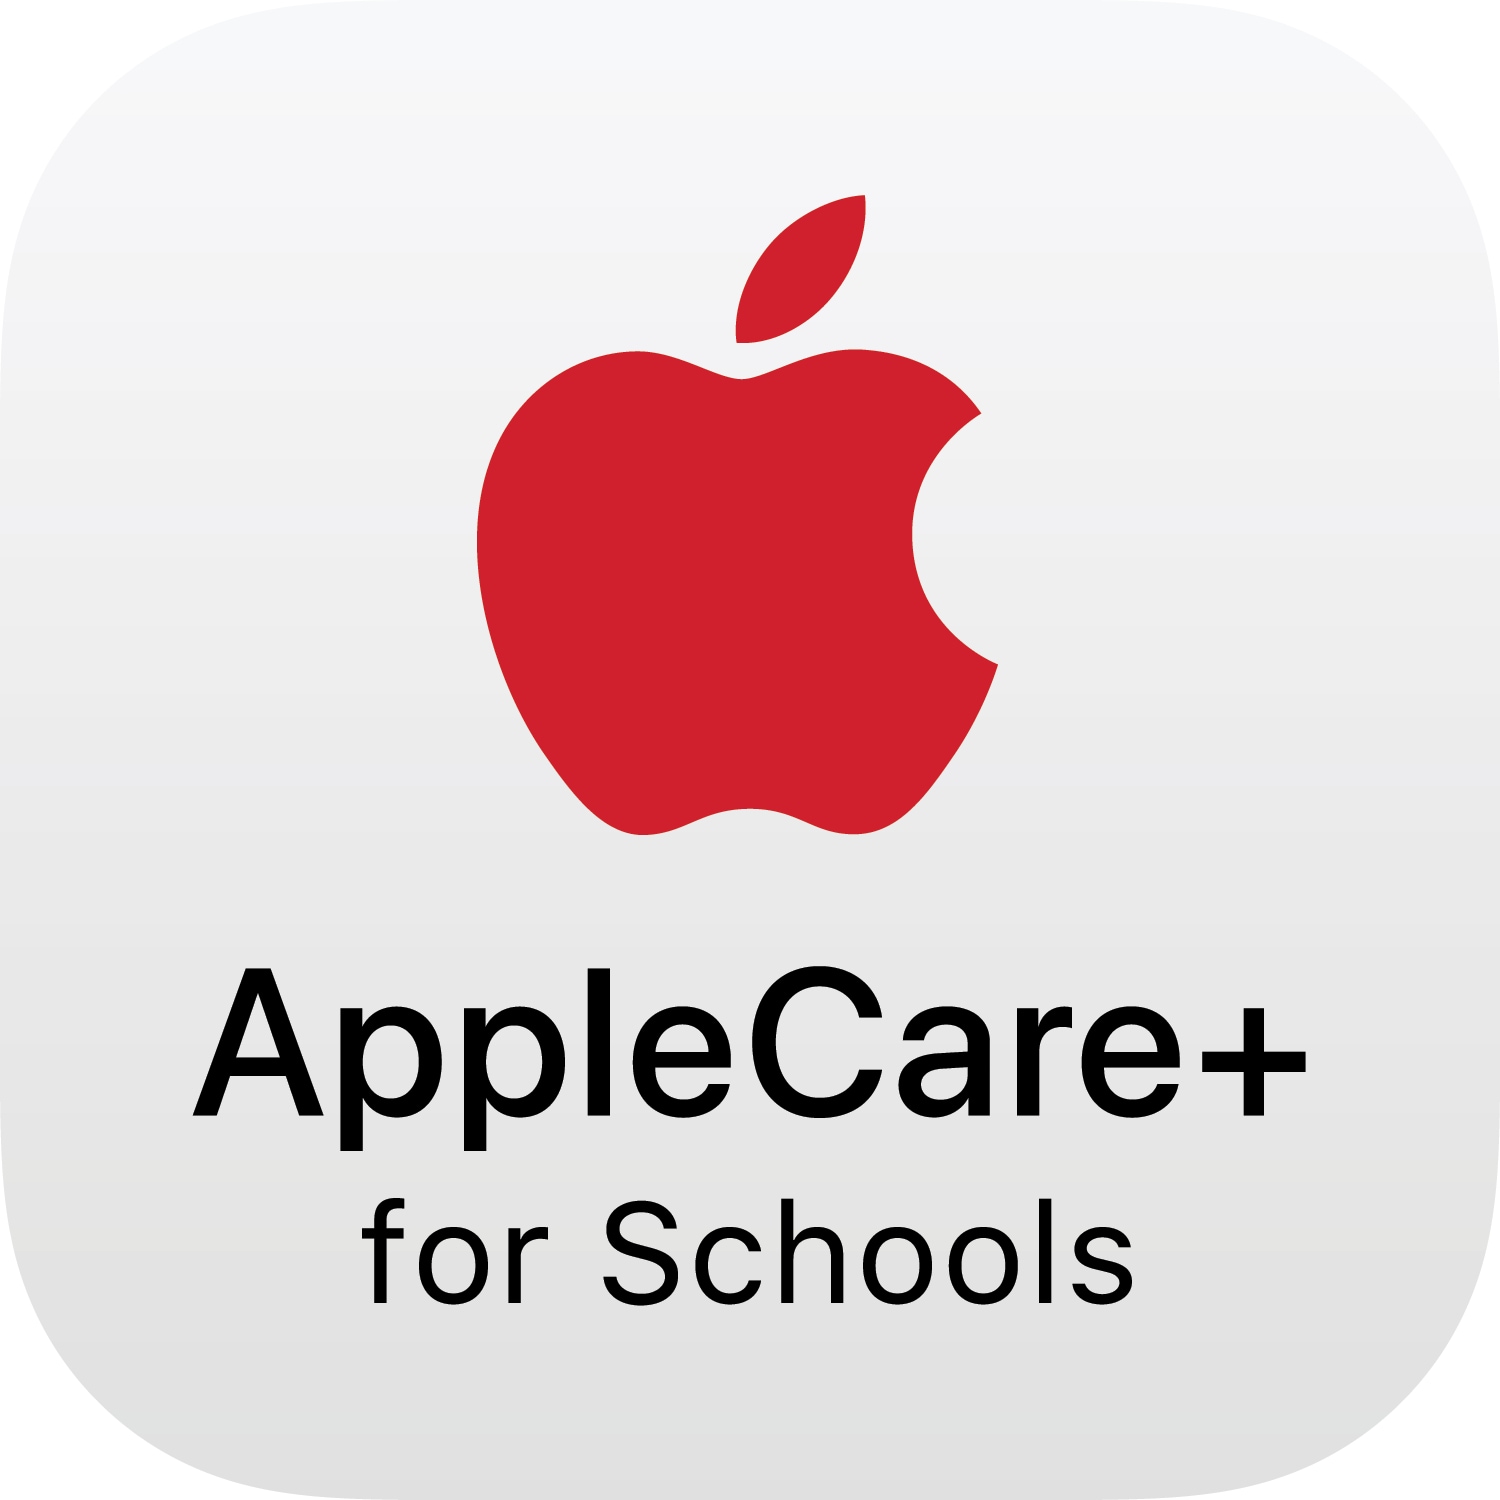 AppleCare+ for Schools - 3 YR - Extended Service Agreement - Mac Pro